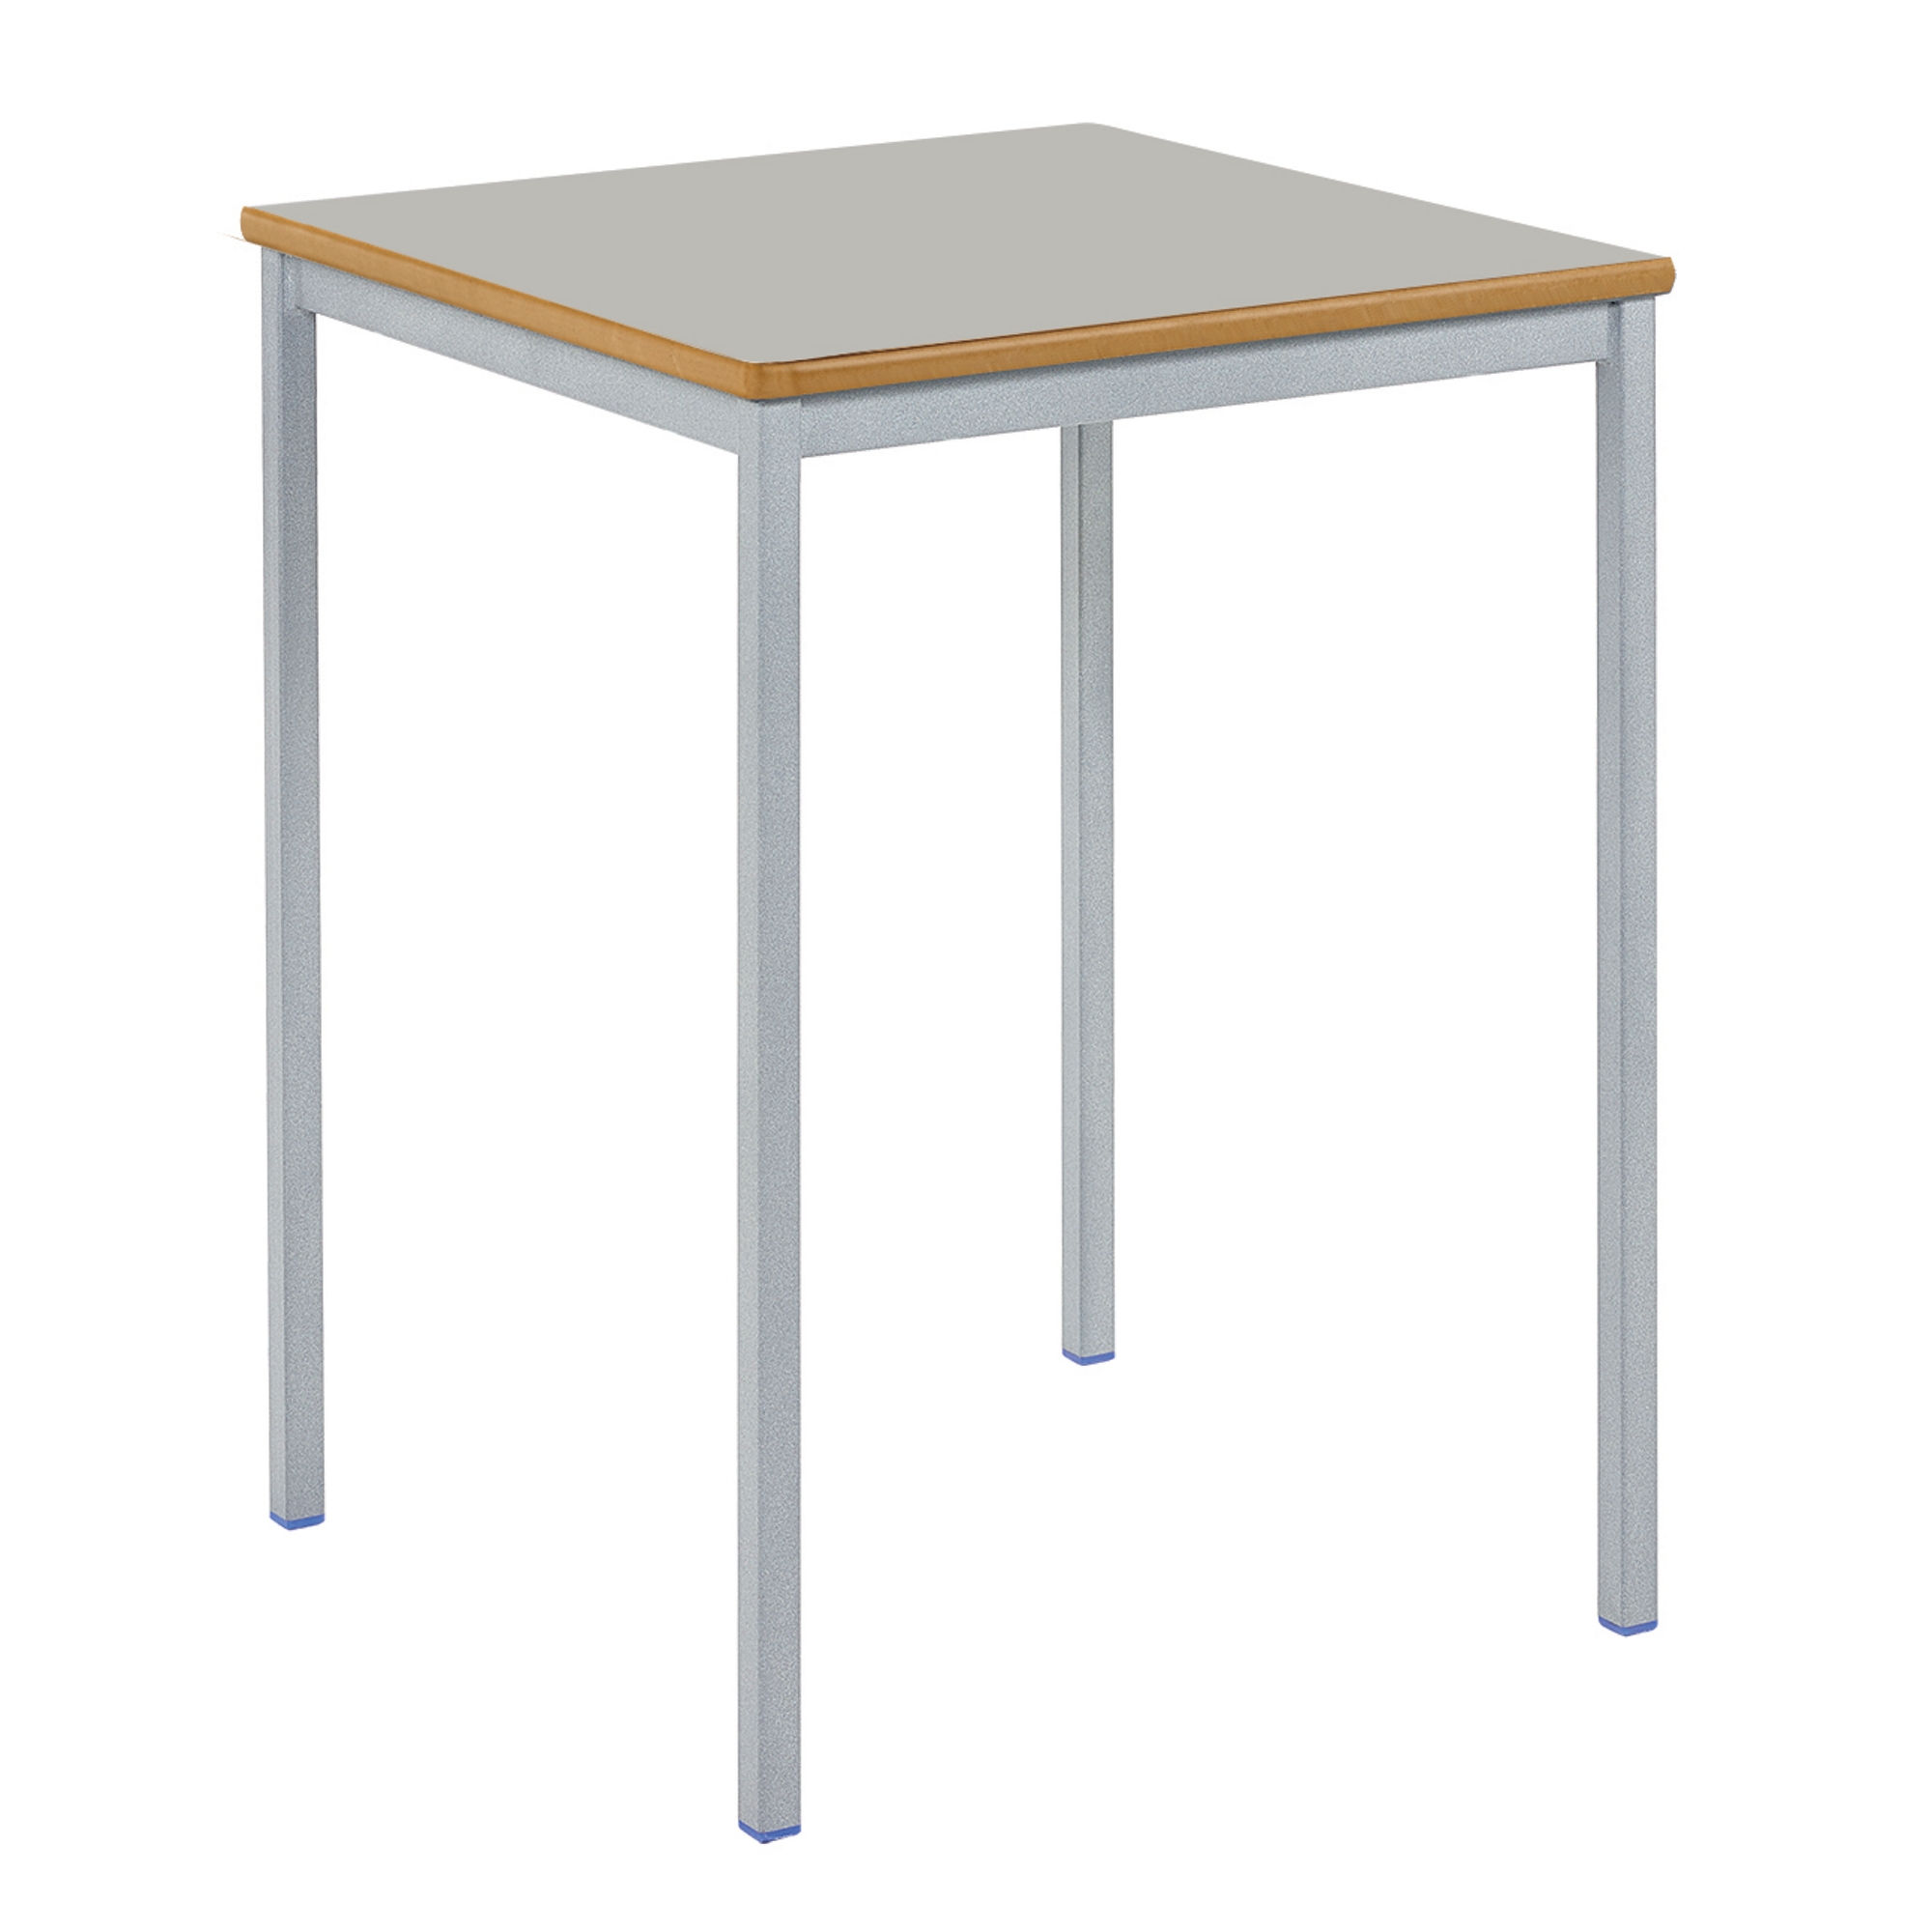 Classmates Square Fully Welded Classroom Table - 600 x 600 x 710mm - Grey